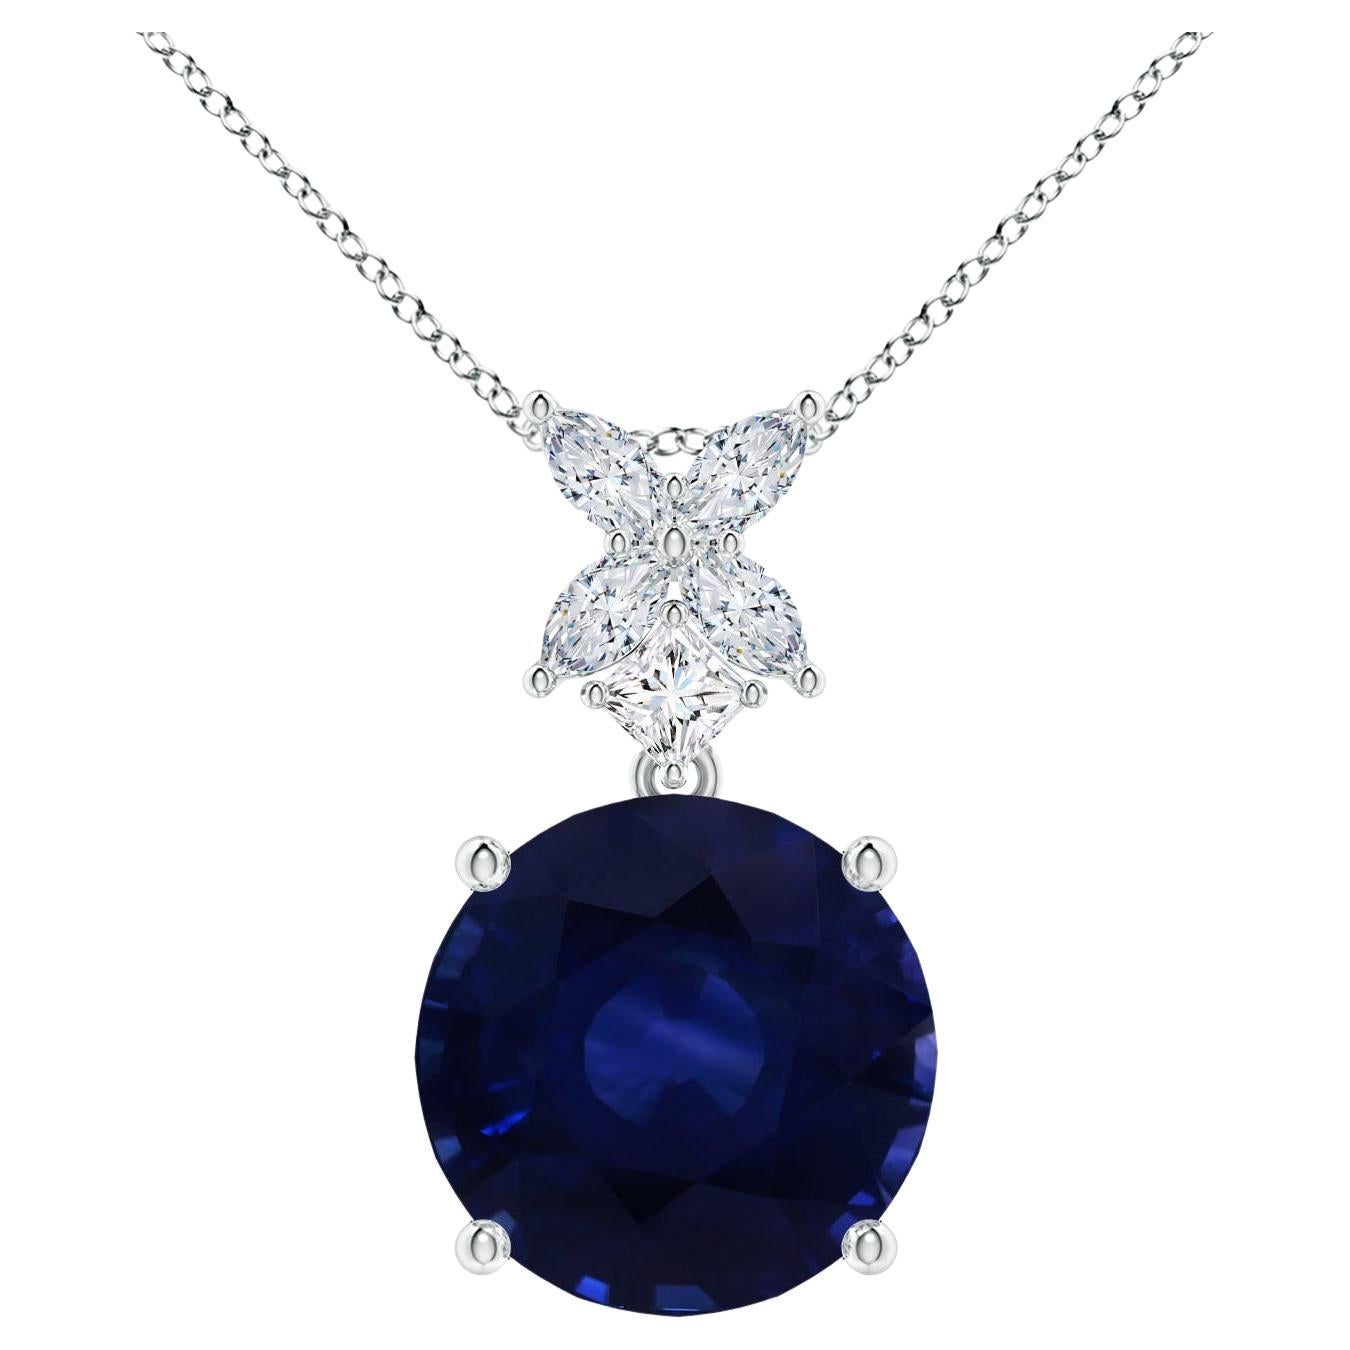 ANGARA GIA Certified Round Natural Blue Sapphire White Gold Pendant Necklace